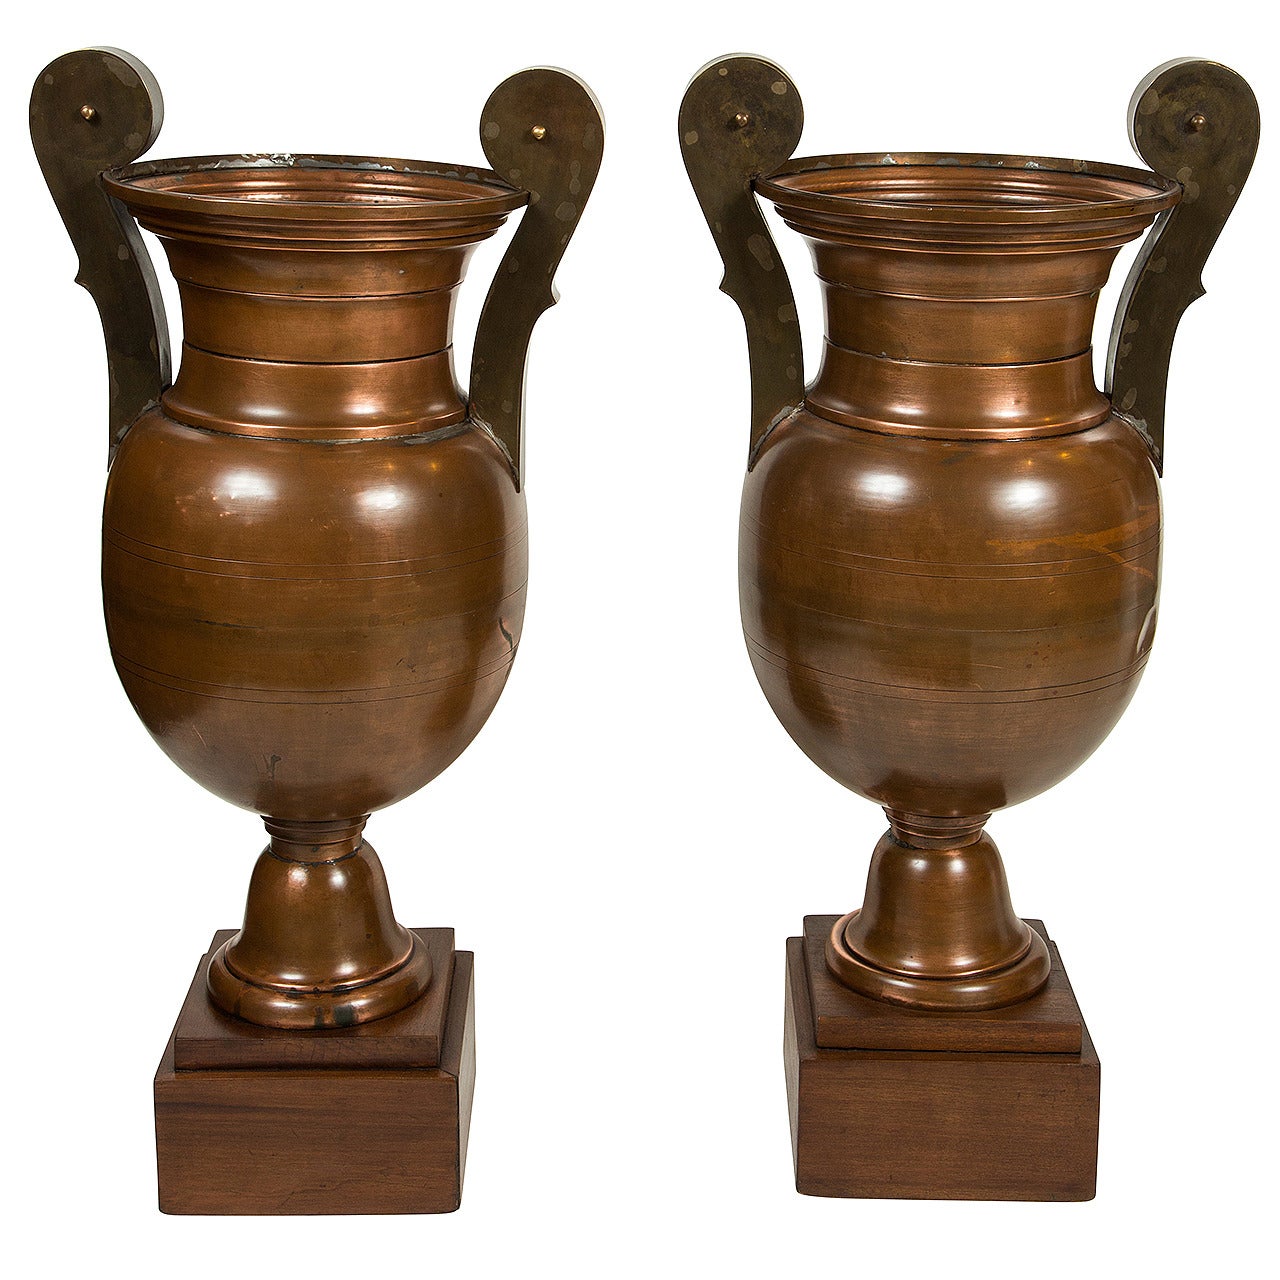 Pair of Chic Copper Urns from the Set of 'Cleopatra'